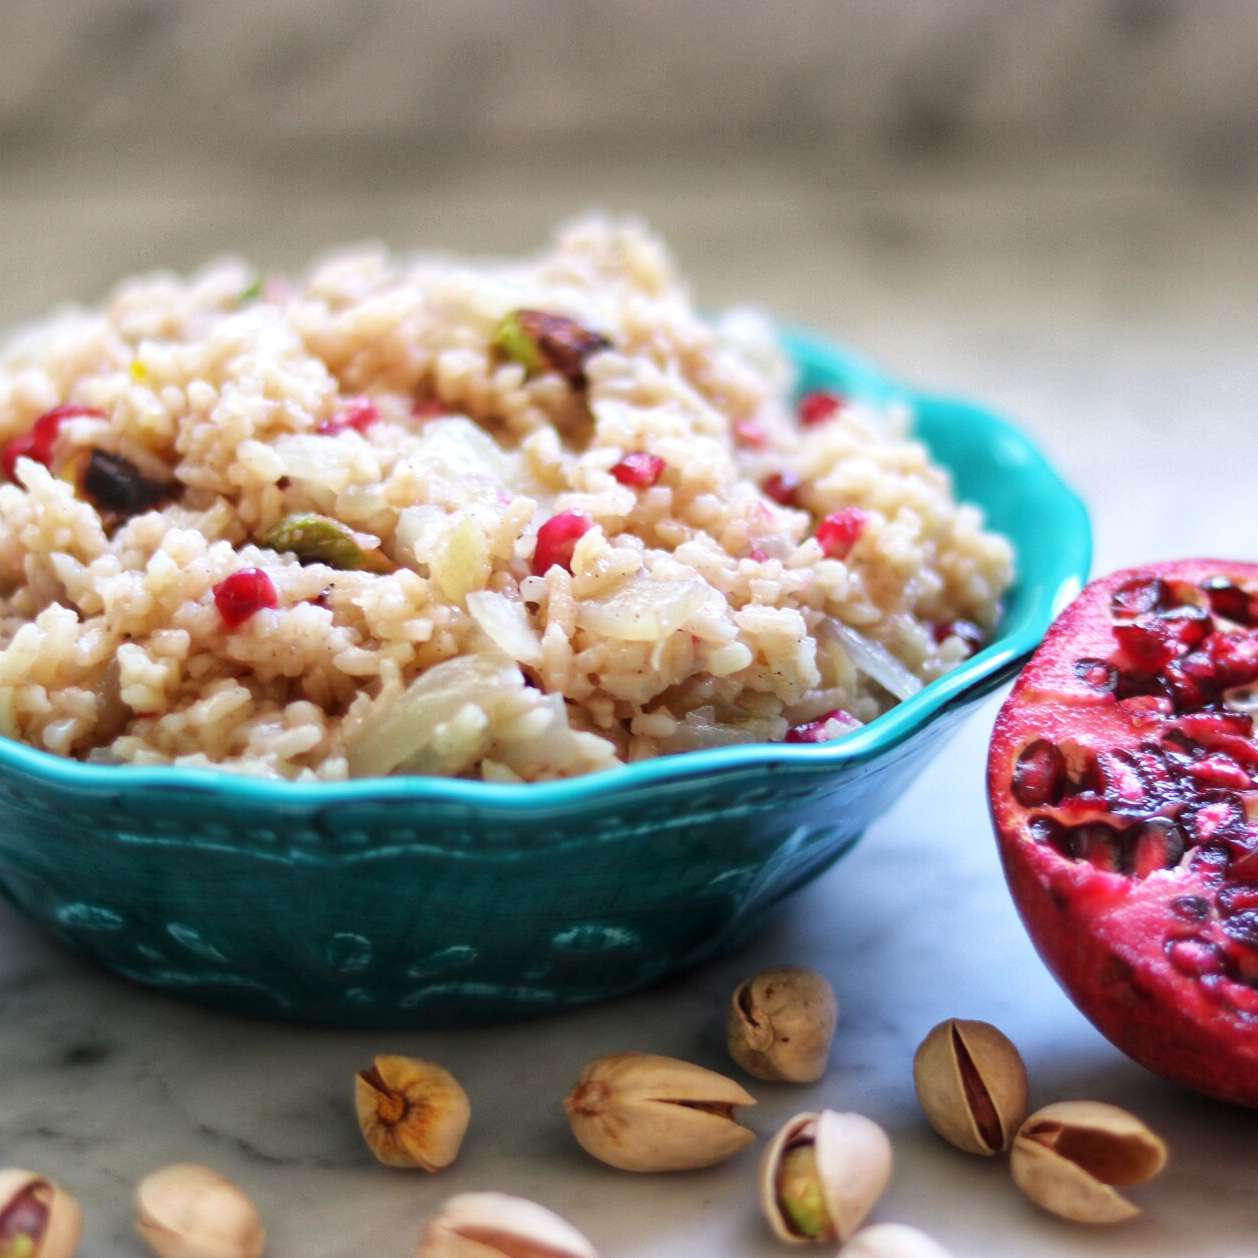 Middle Eastern Rice Pilaf with Pomegranate in a turquoise bowl with a pomegranate